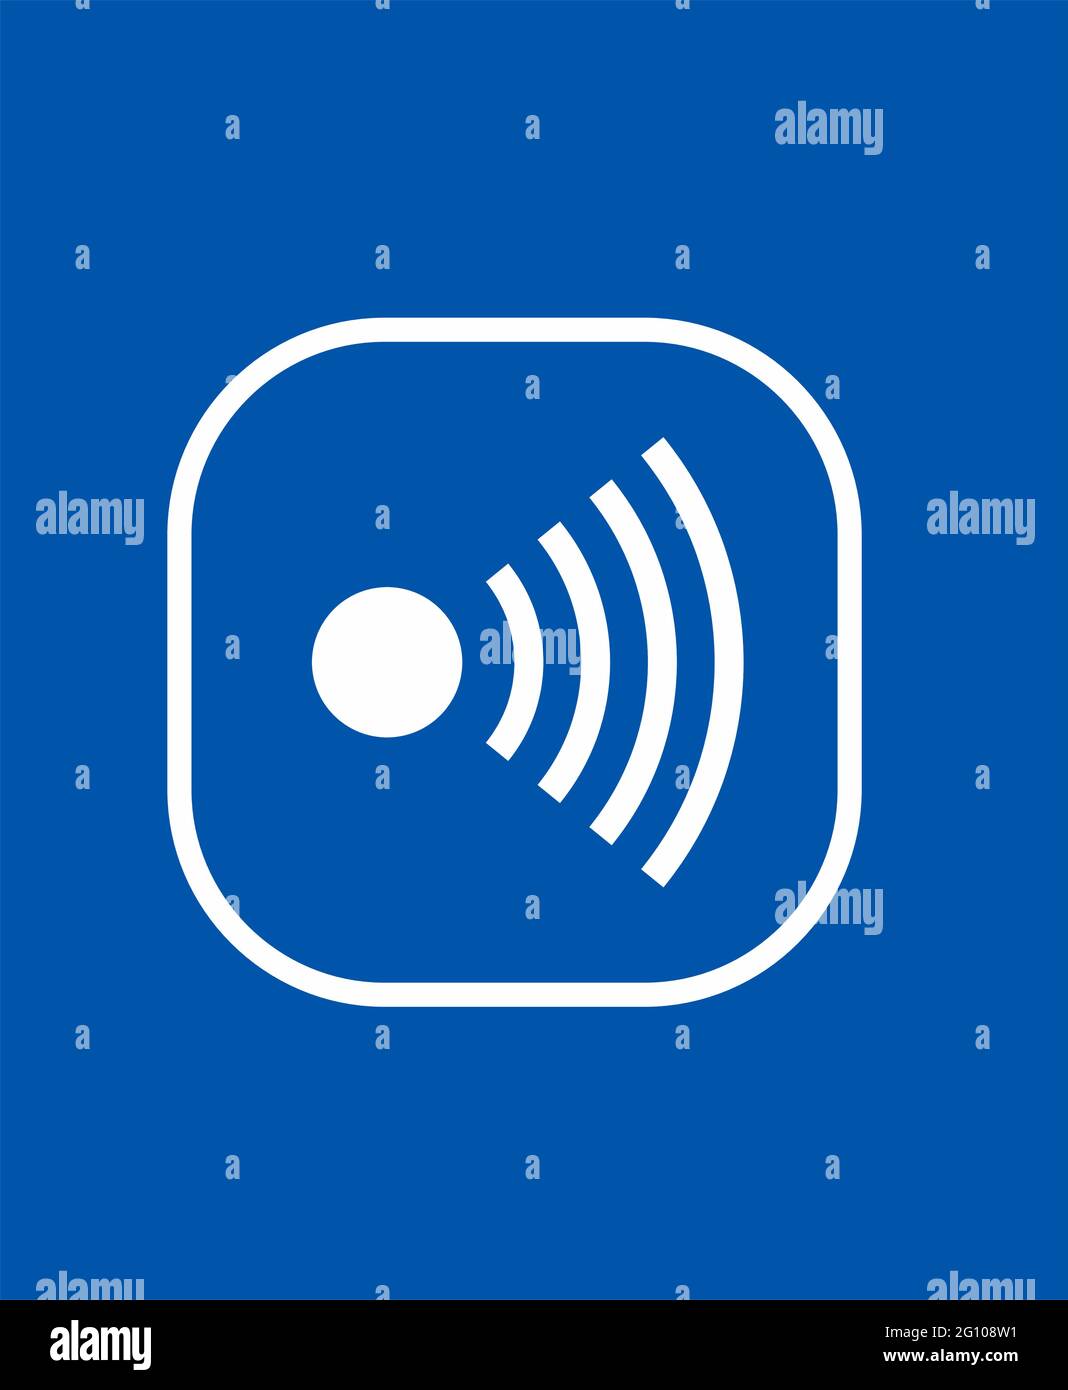 Wifi logo in a rectangle with rounded corners vector white on blue Stock Vector